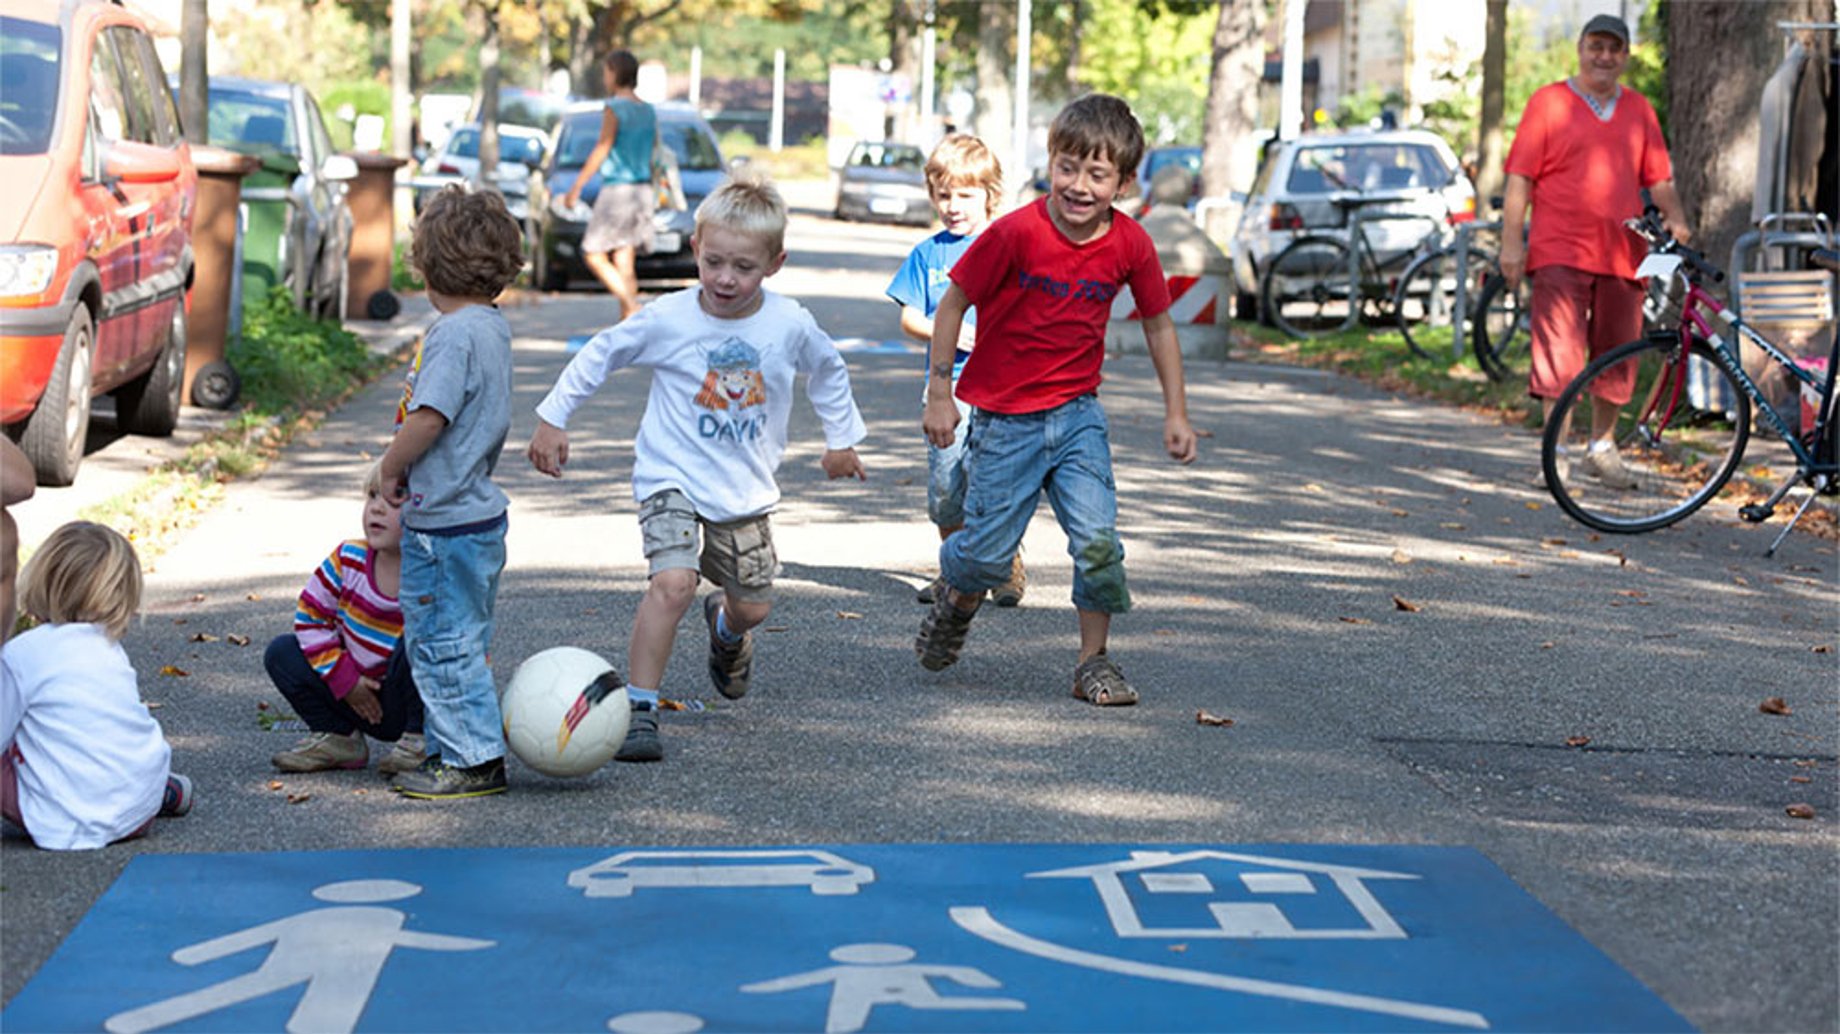 Children playing a city